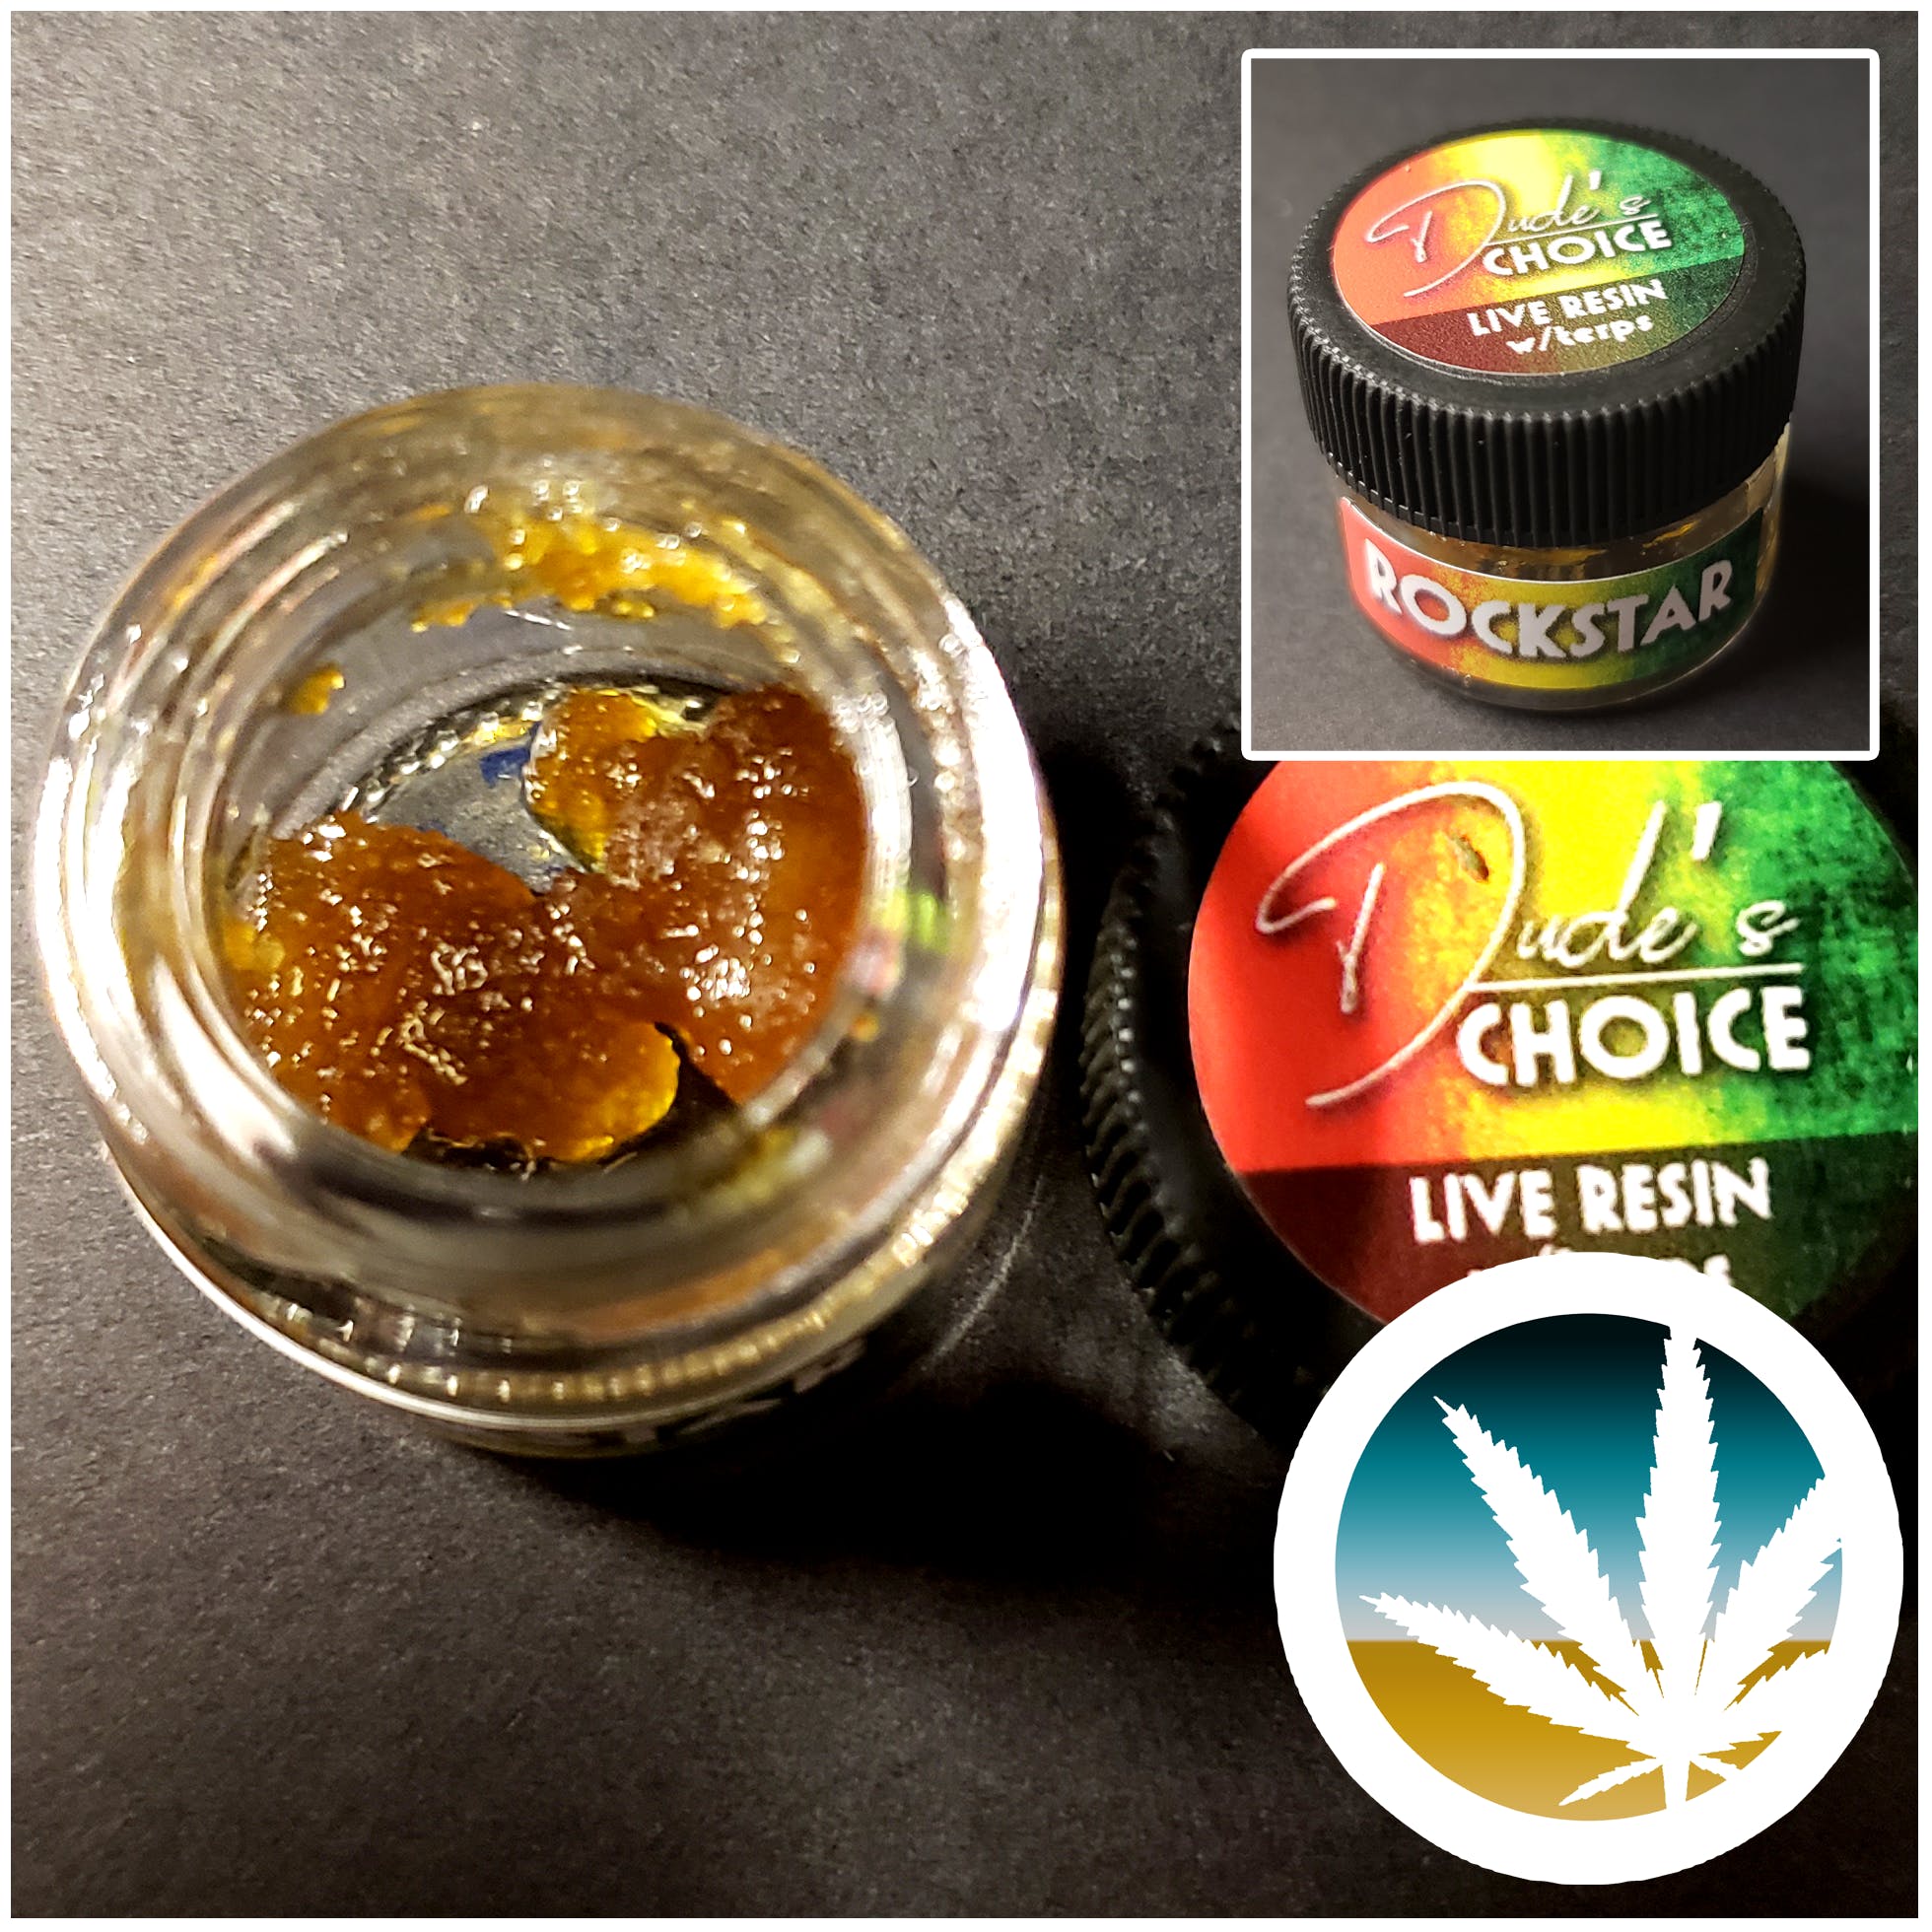 Dude's Choice - Live Resin with Terps